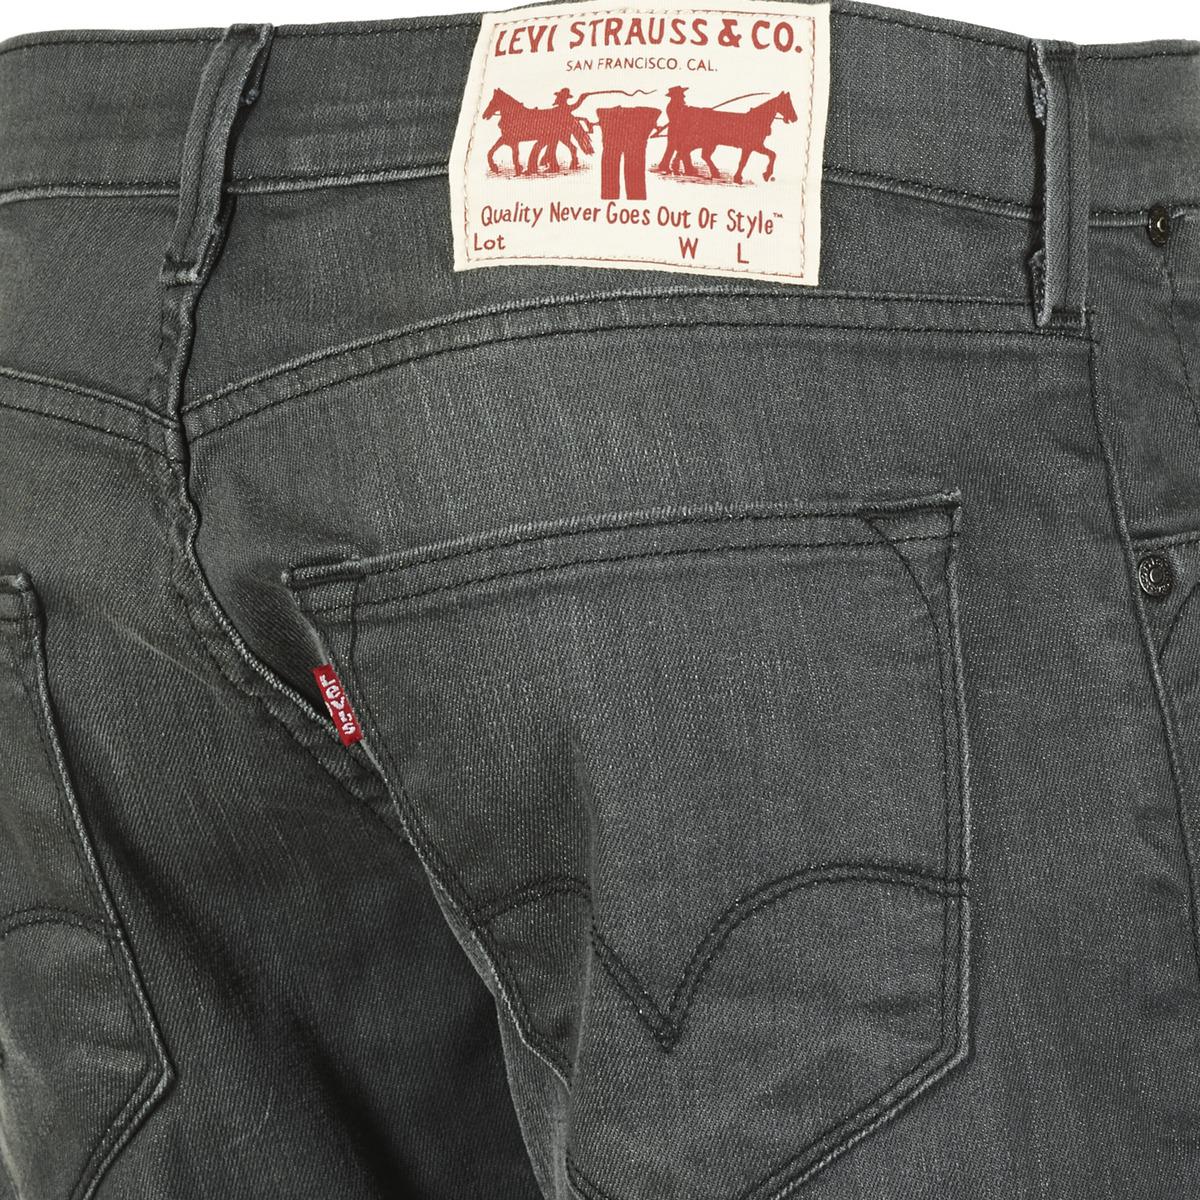 levi 504 jeans for sale